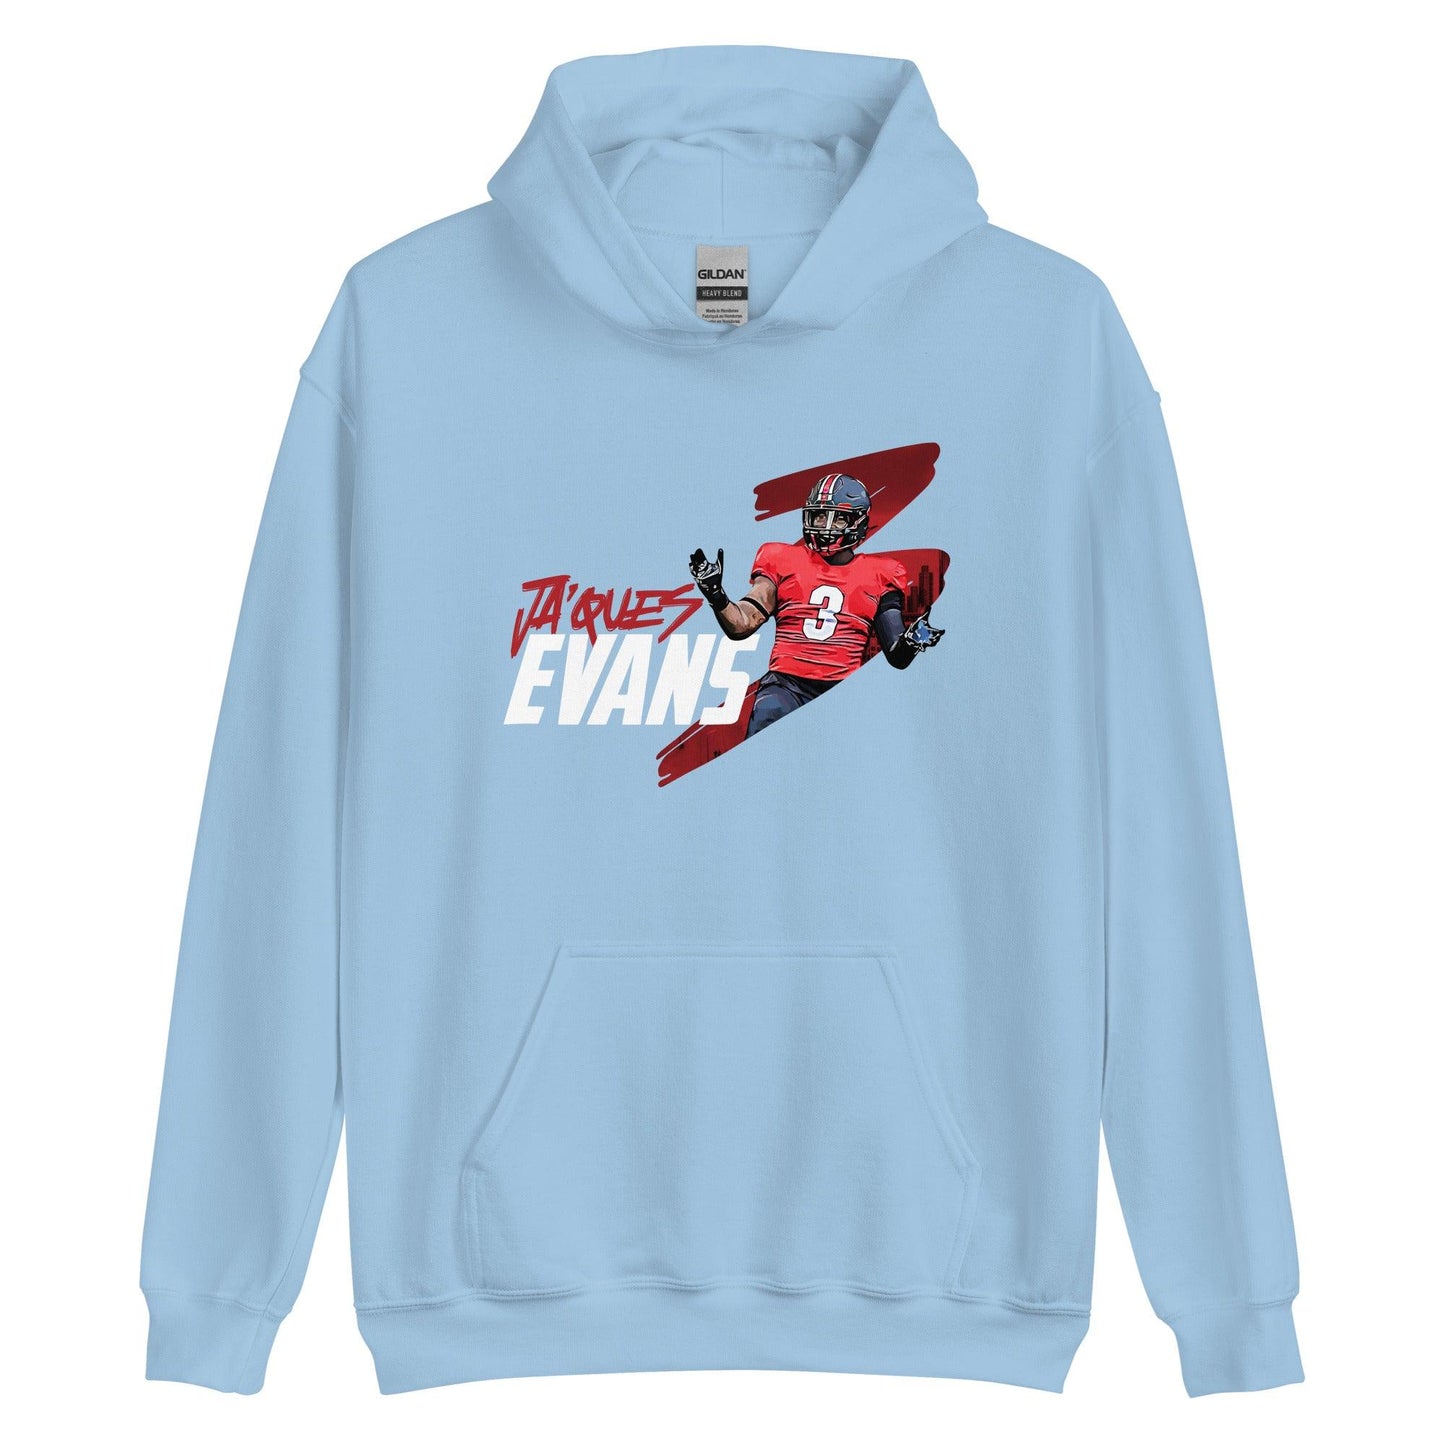 Jaques Evans "Gameday" Hoodie - Fan Arch